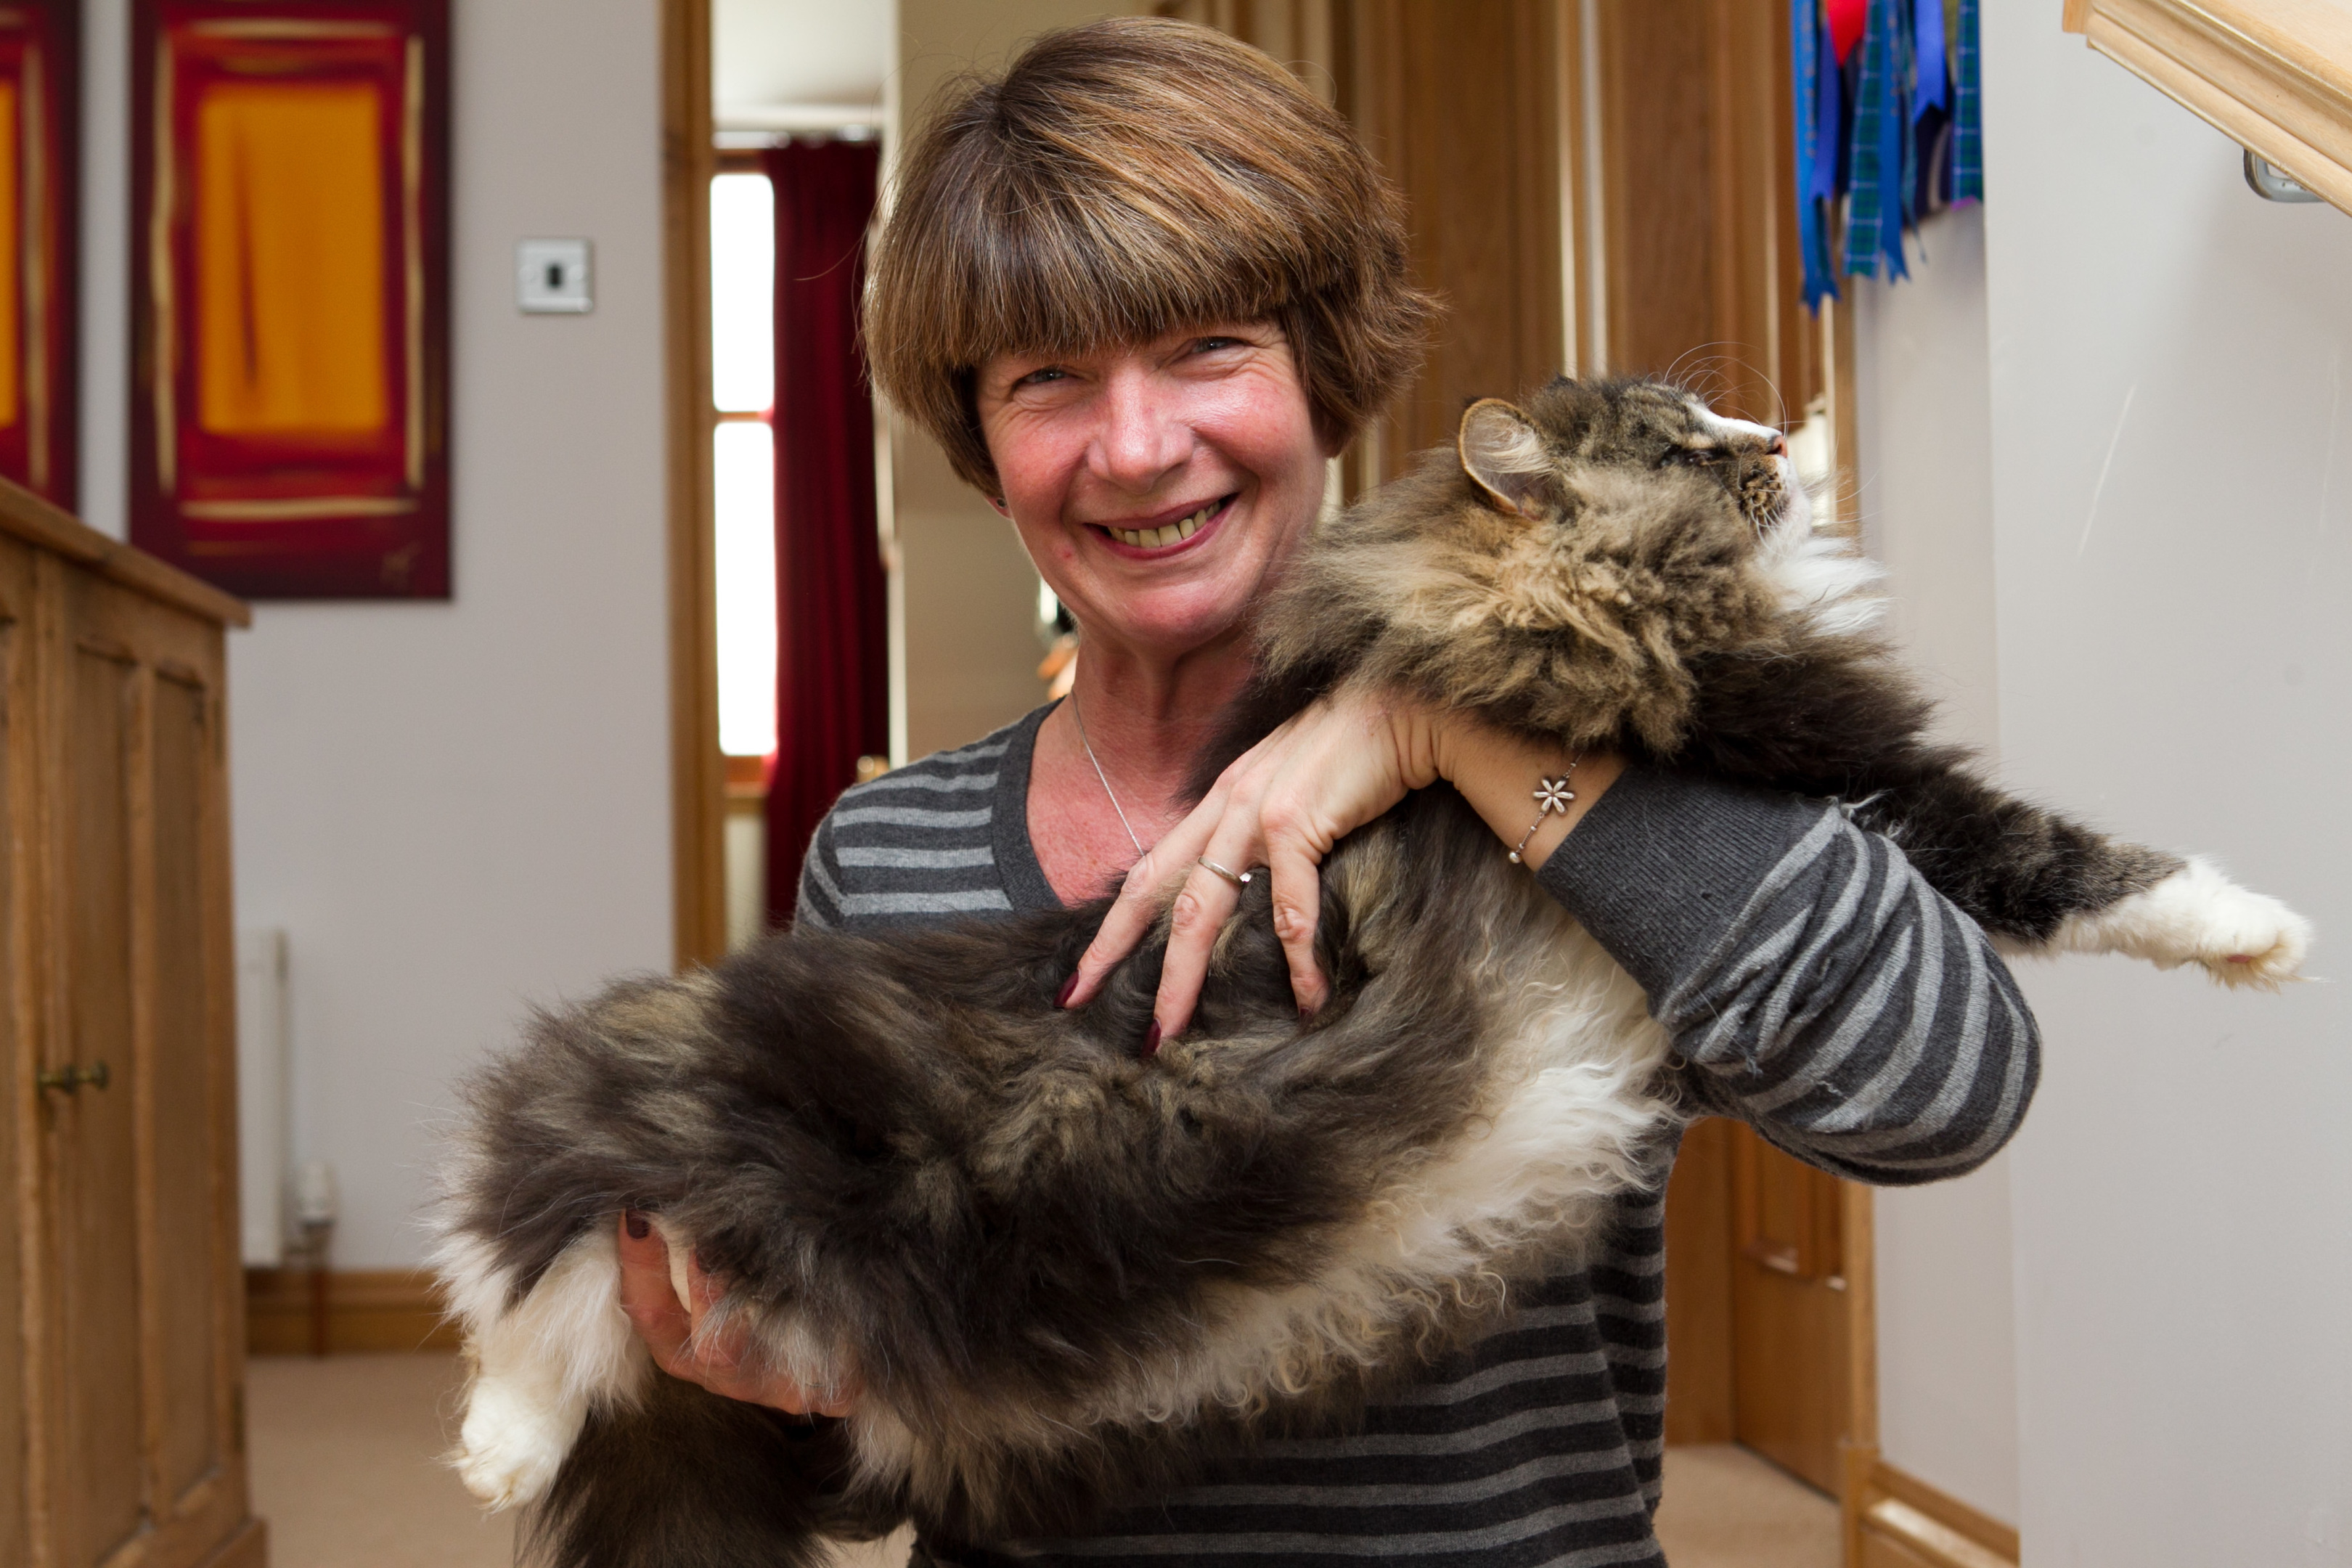 Mandy and her cat (Andrew Cawley / DC Thomson)